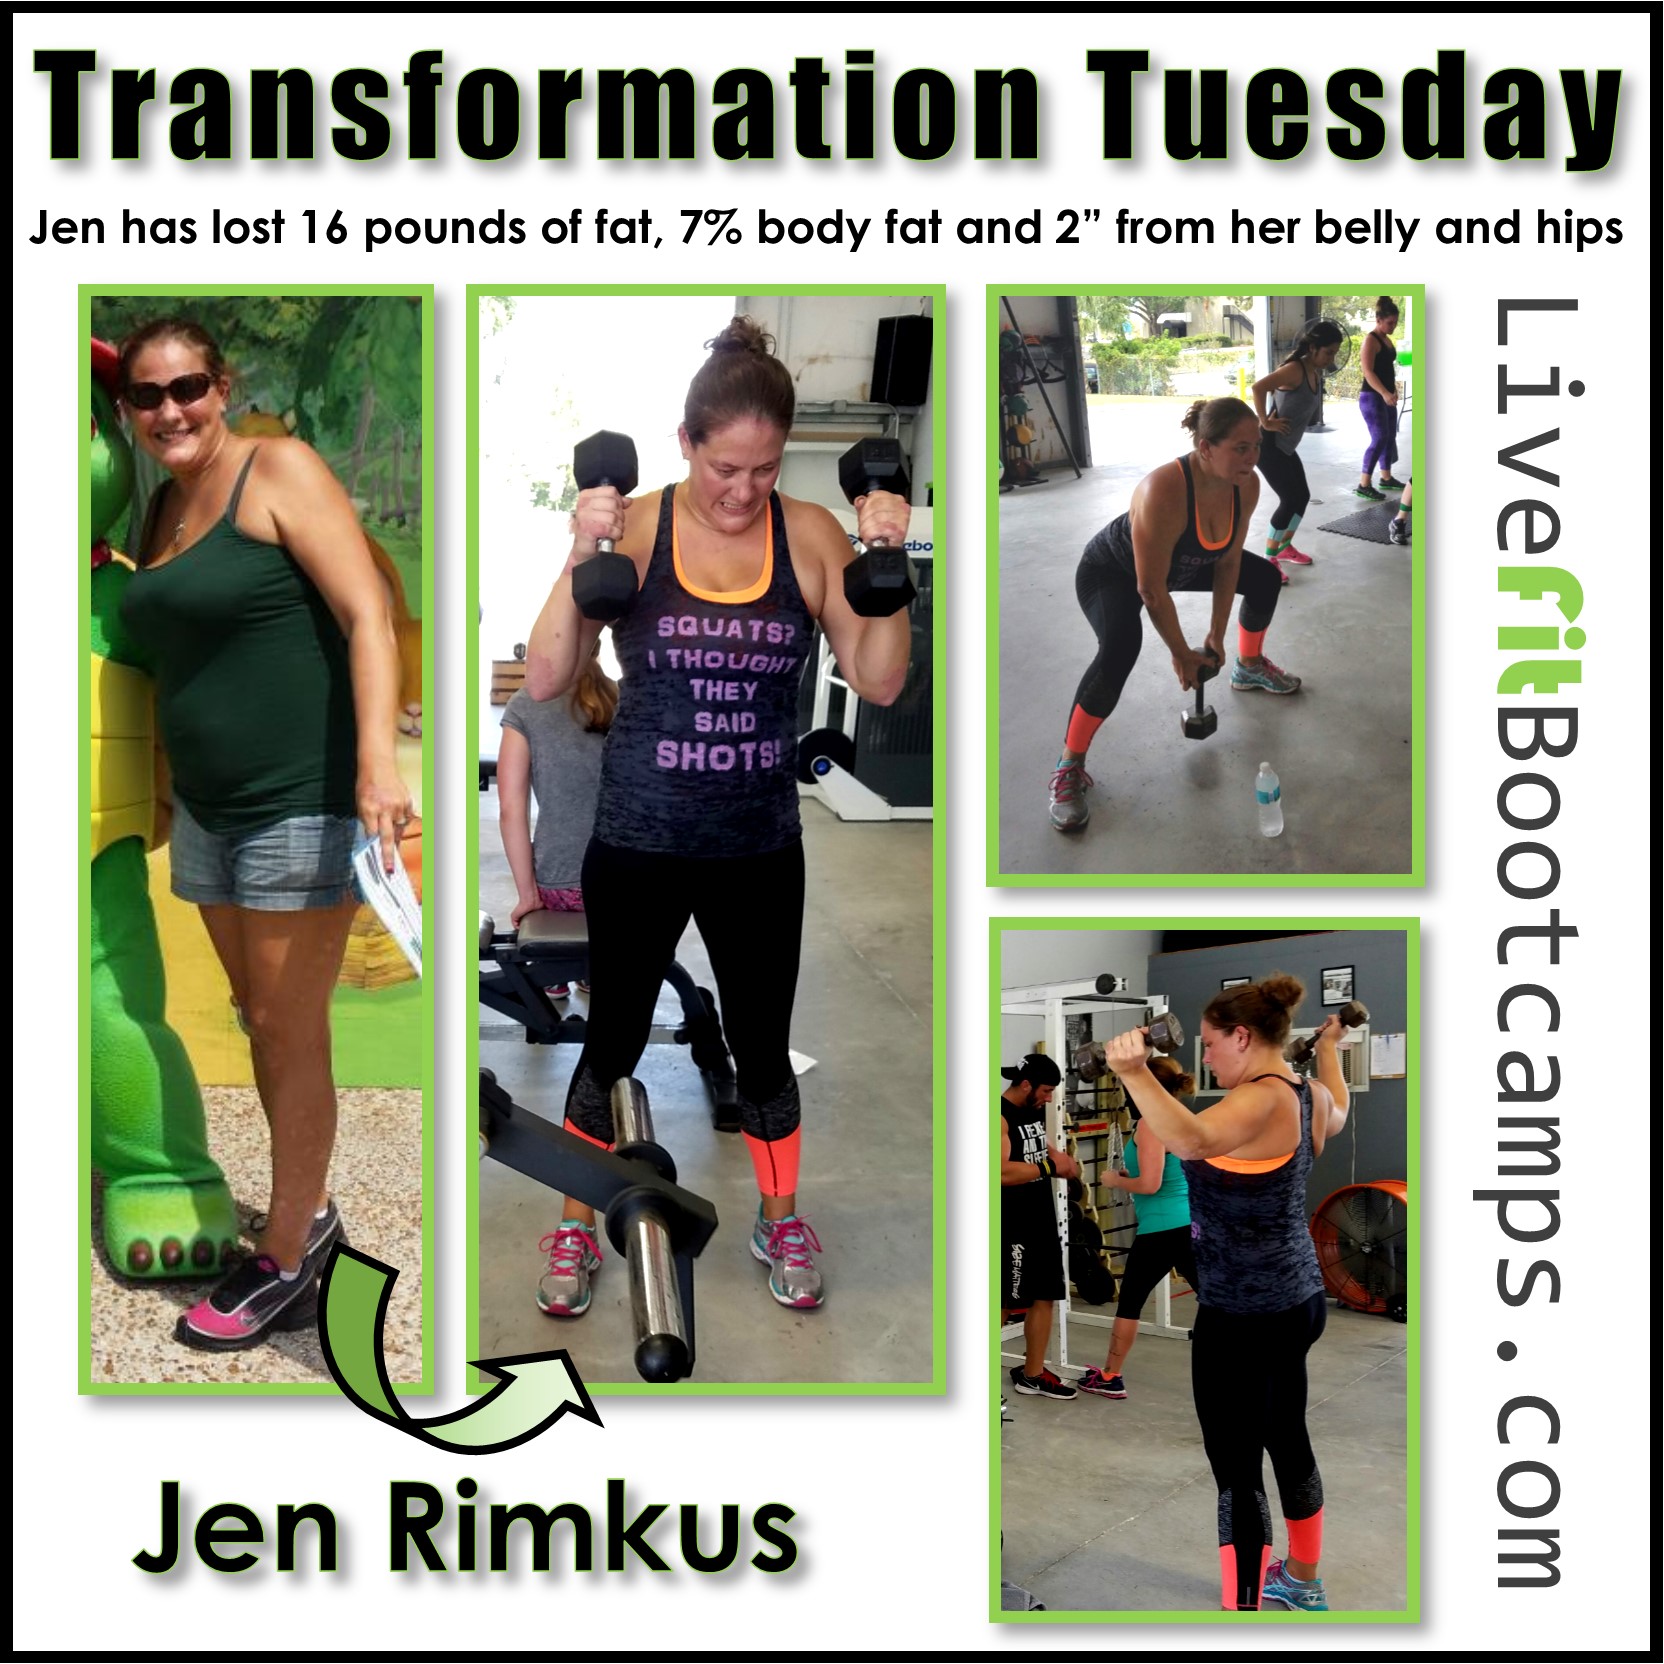 Jen drops 16 pounds of fat (Transformation Tuesday)